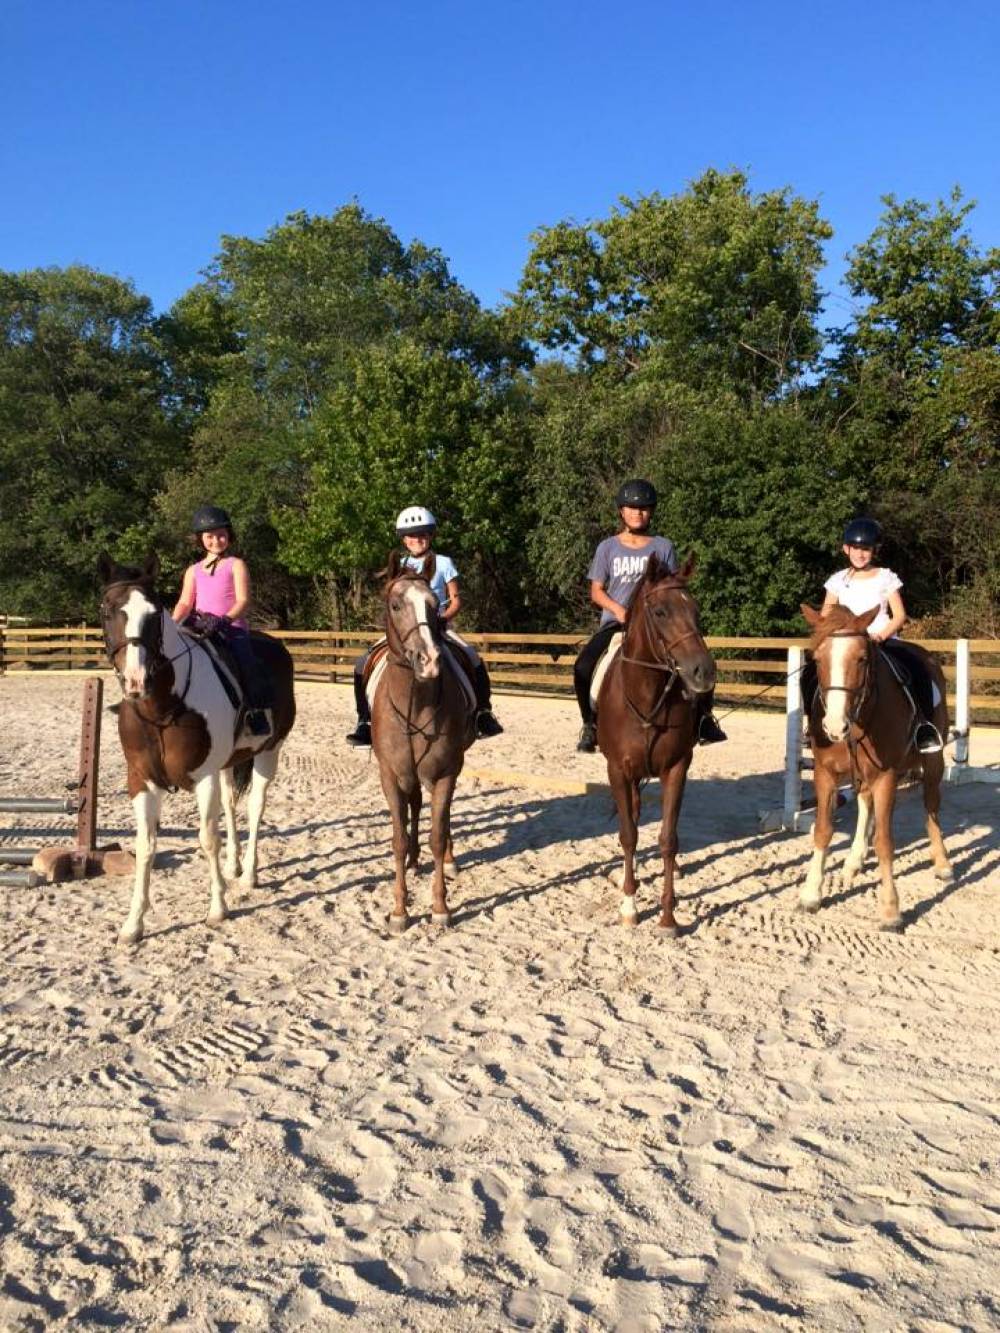 TOP ILLINOIS EQUESTRIAN CAMP: Windridge Farm Summer Horse Camp is a Top Equestrian Summer Camp located in Bolingbrook Illinois offering many fun and enriching Equestrian and other camp programs. 